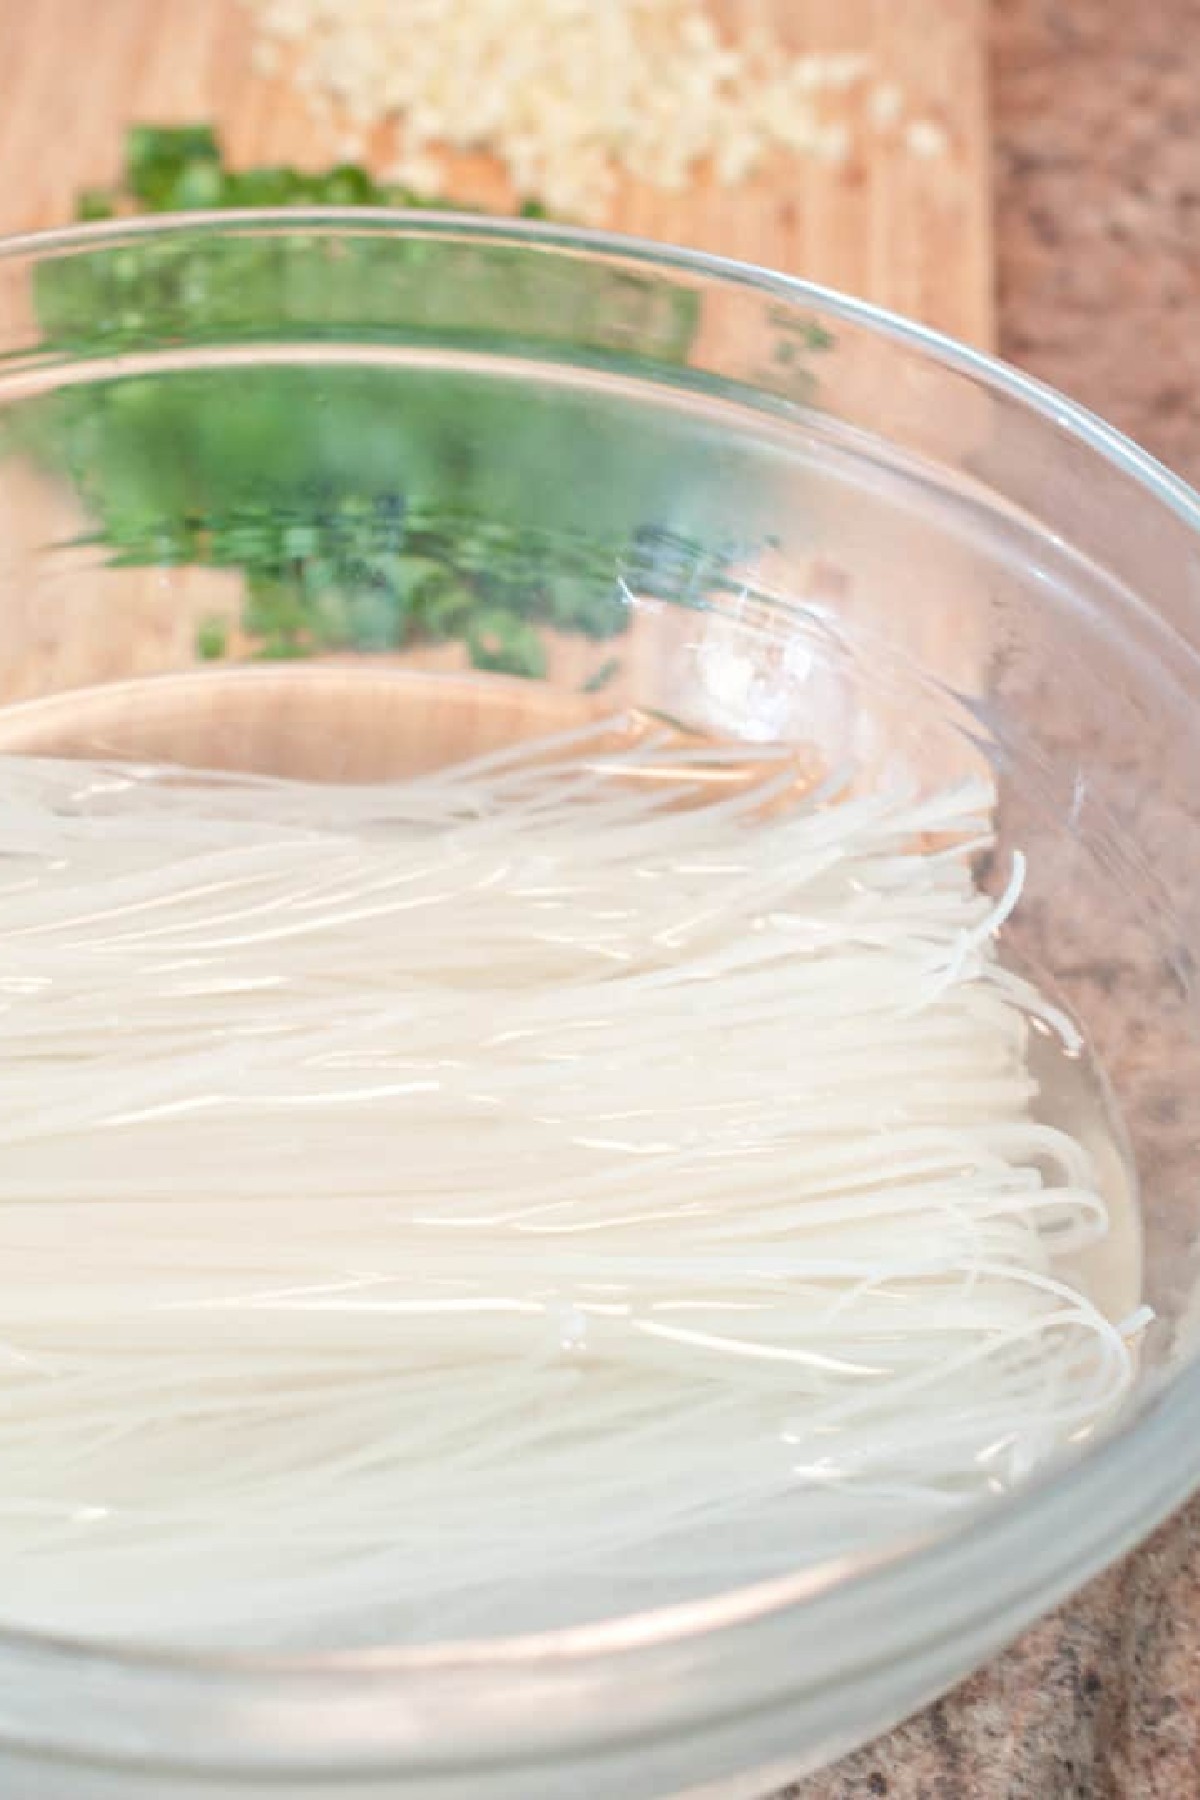 rice noodles soaking in a bowl of water.